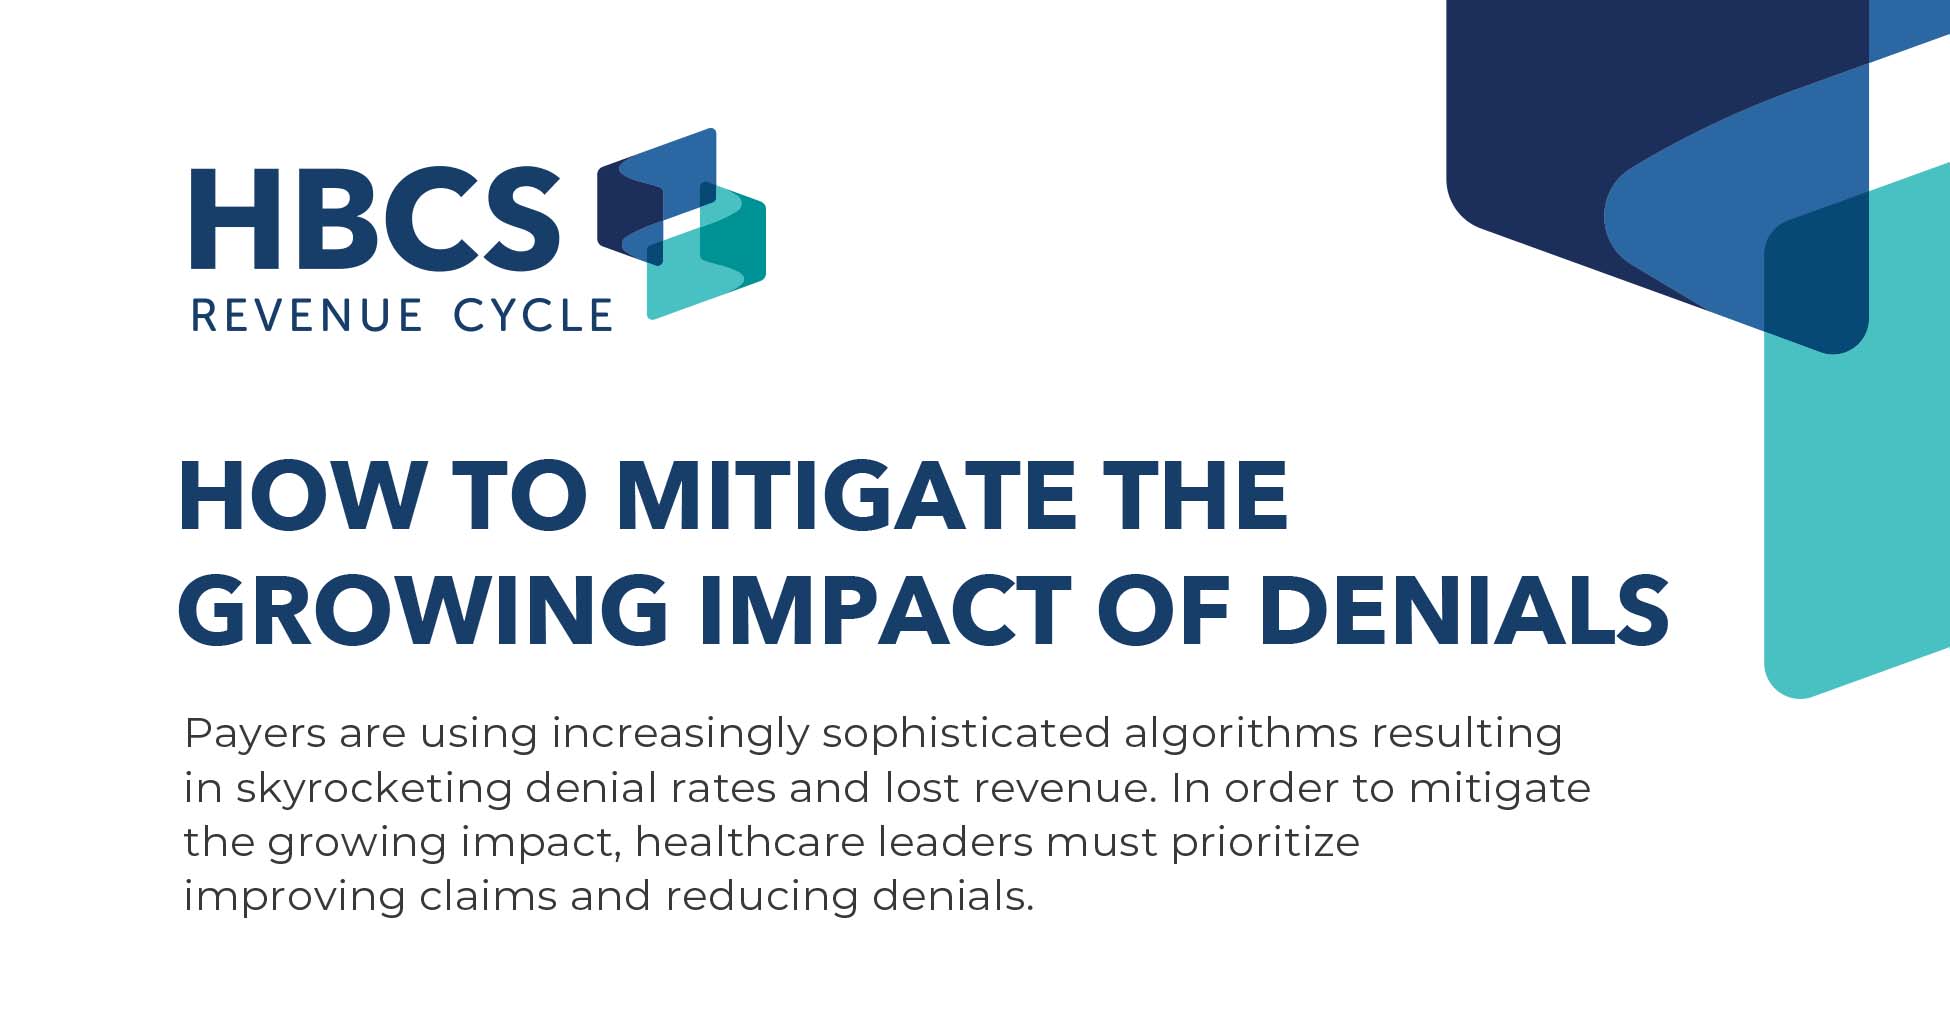 How to Mitigate the Growing Impact of Denials